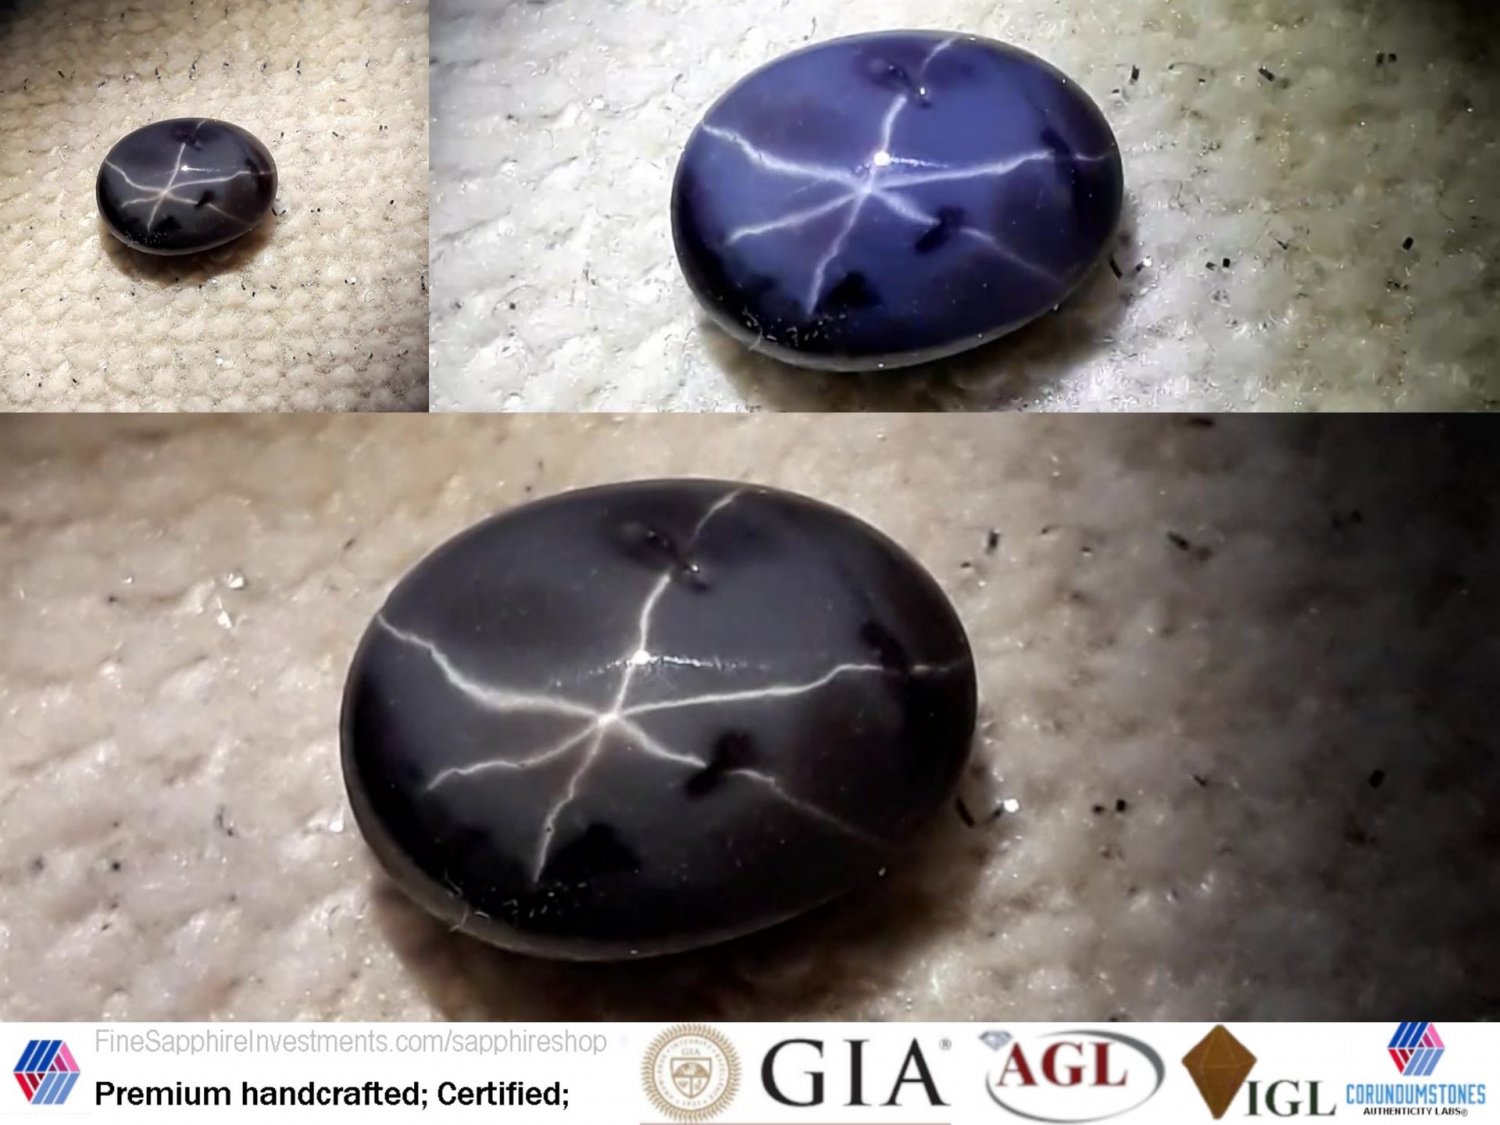 2.15 ct GIA untreated black Ceylon Star Spinel, GIA premium handcrafted step cut with lustrous finis